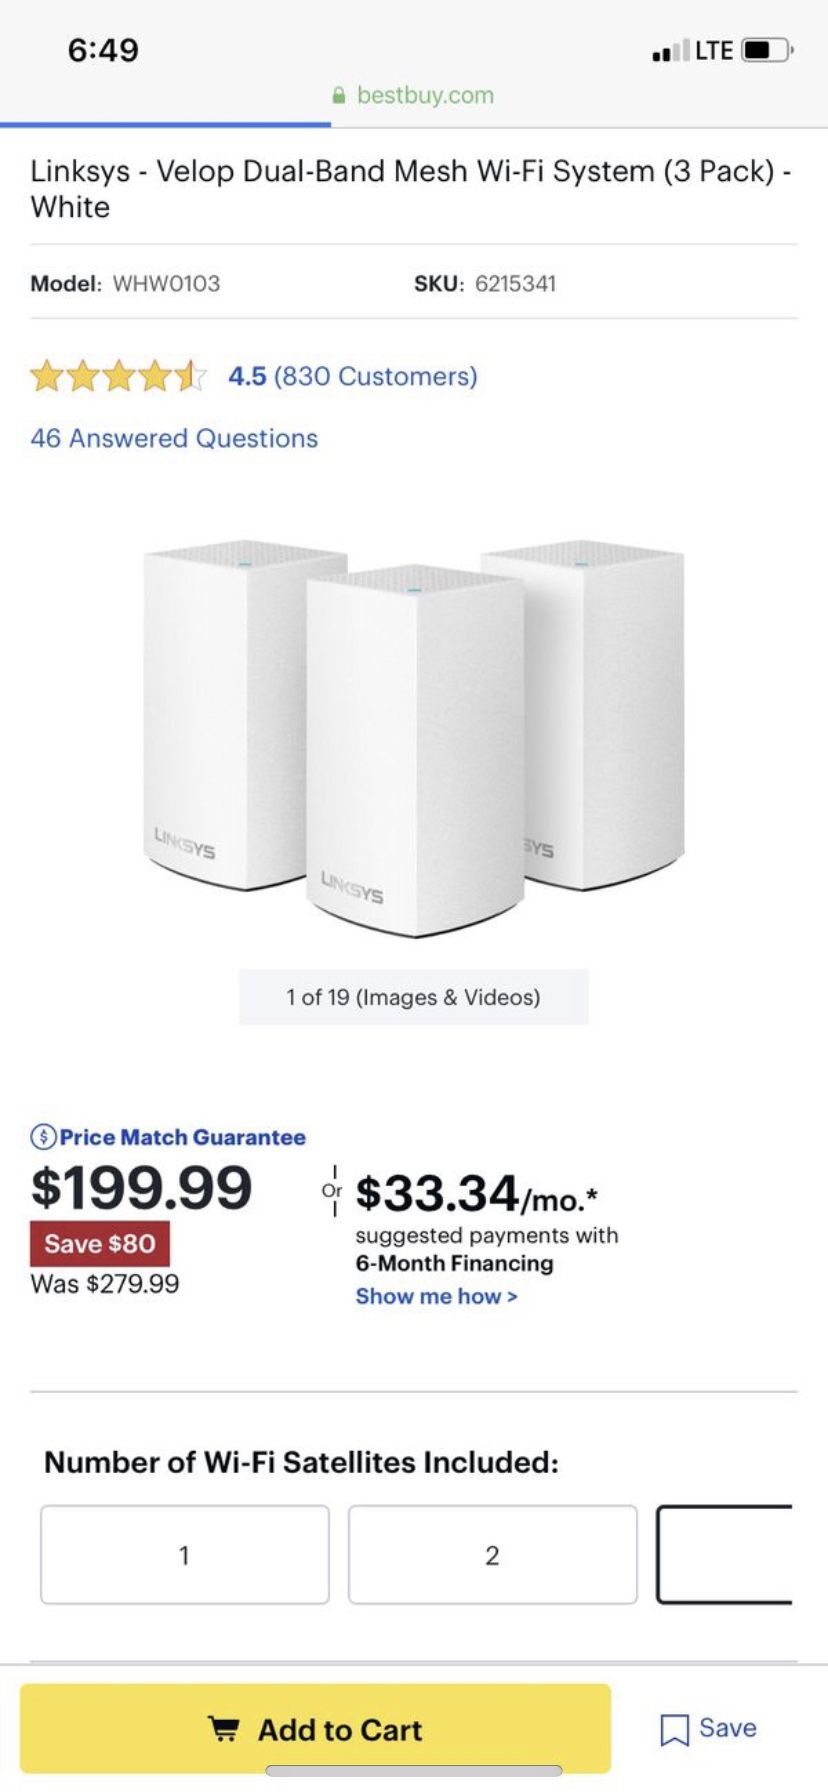 NEW Linksys Velop Wireless AC-3900 Dual Band Mesh WiFi router (3 pack